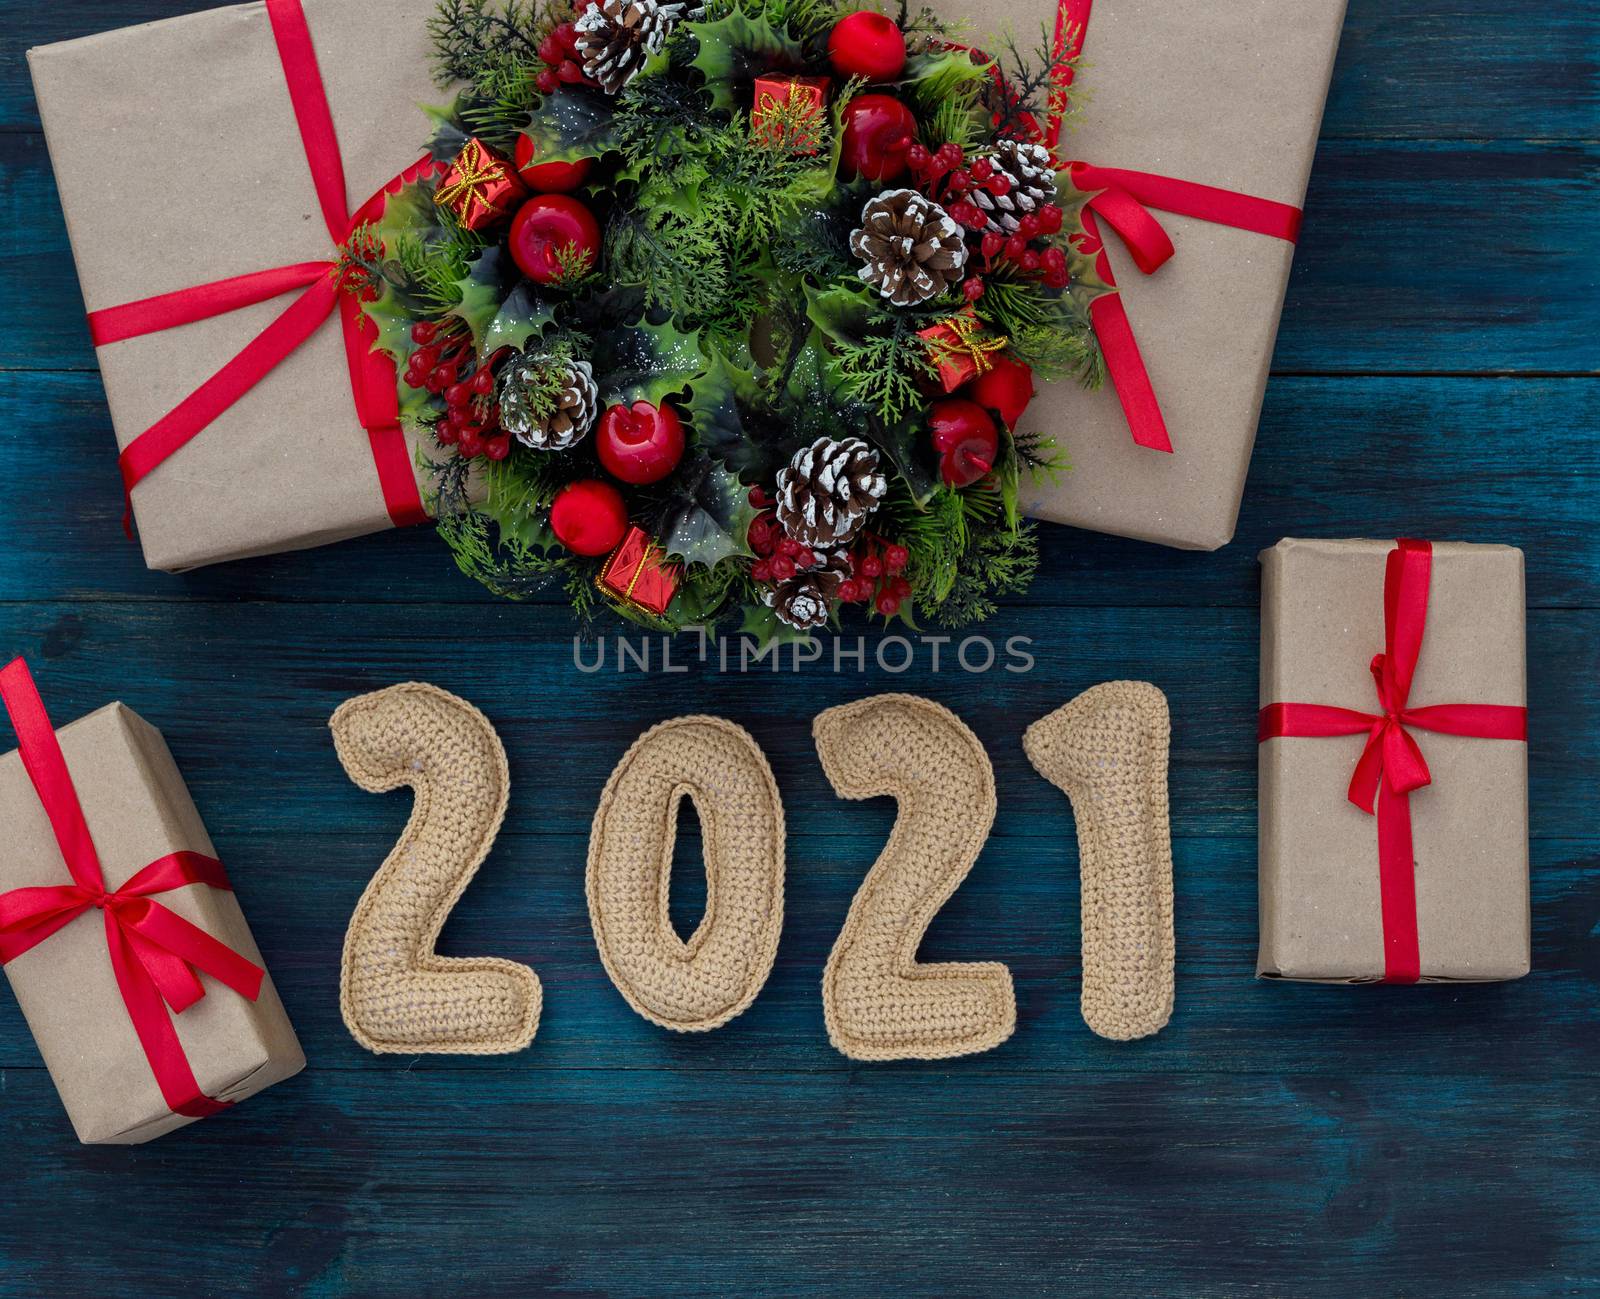 .Christmas background with knitted numbers 2021, gifts and decorative wreath by galinasharapova